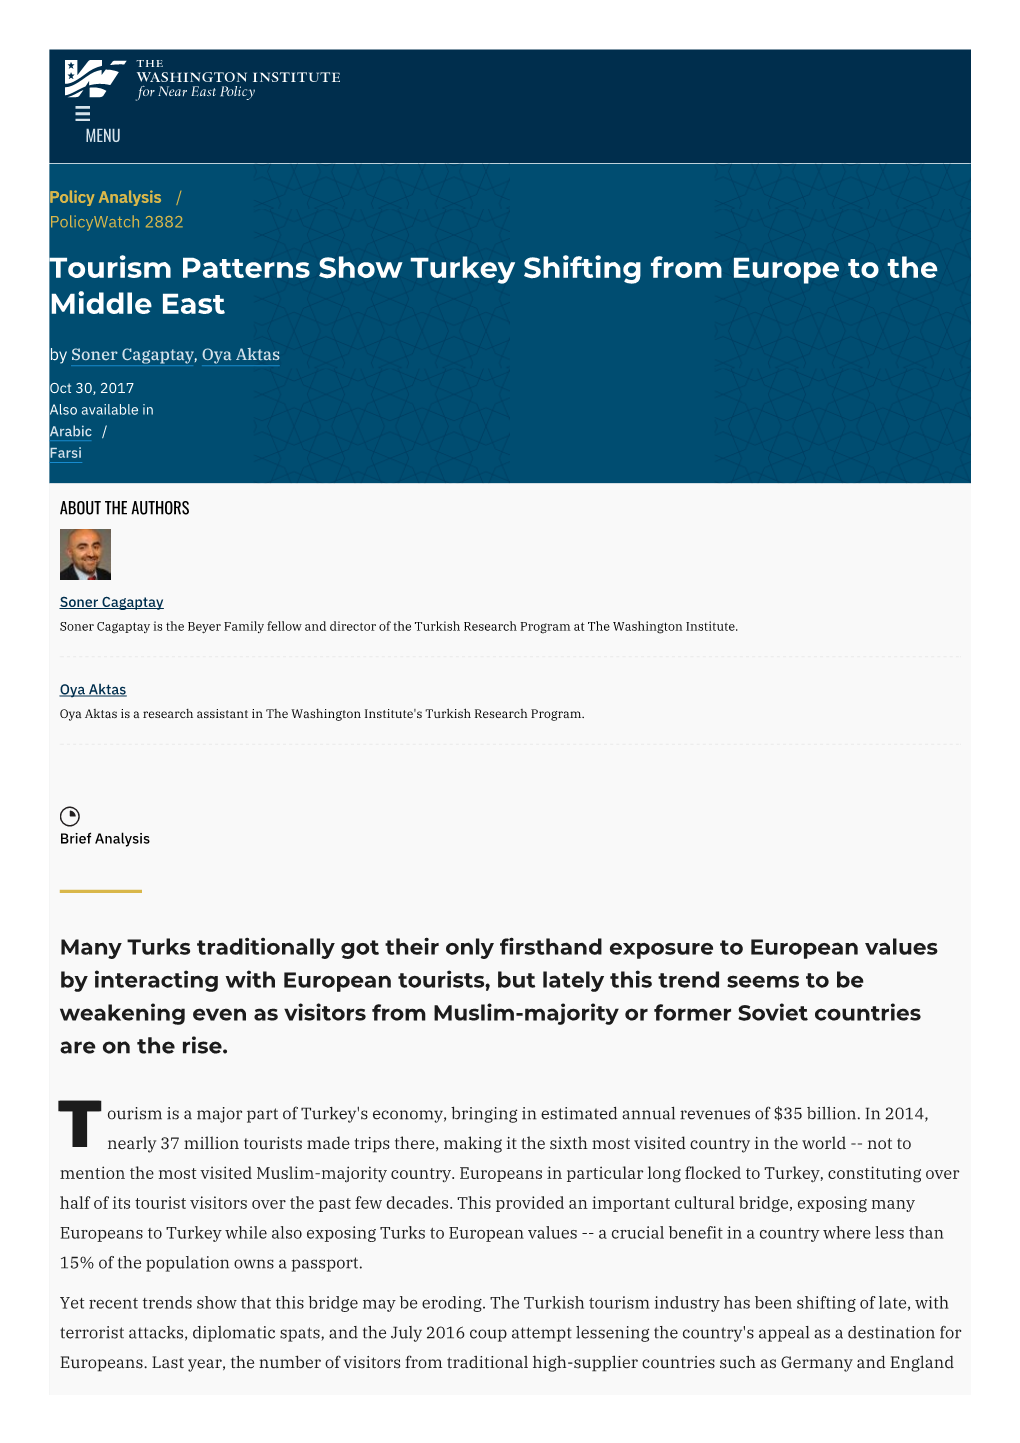 Tourism Patterns Show Turkey Shifting from Europe to the Middle East by Soner Cagaptay, Oya Aktas